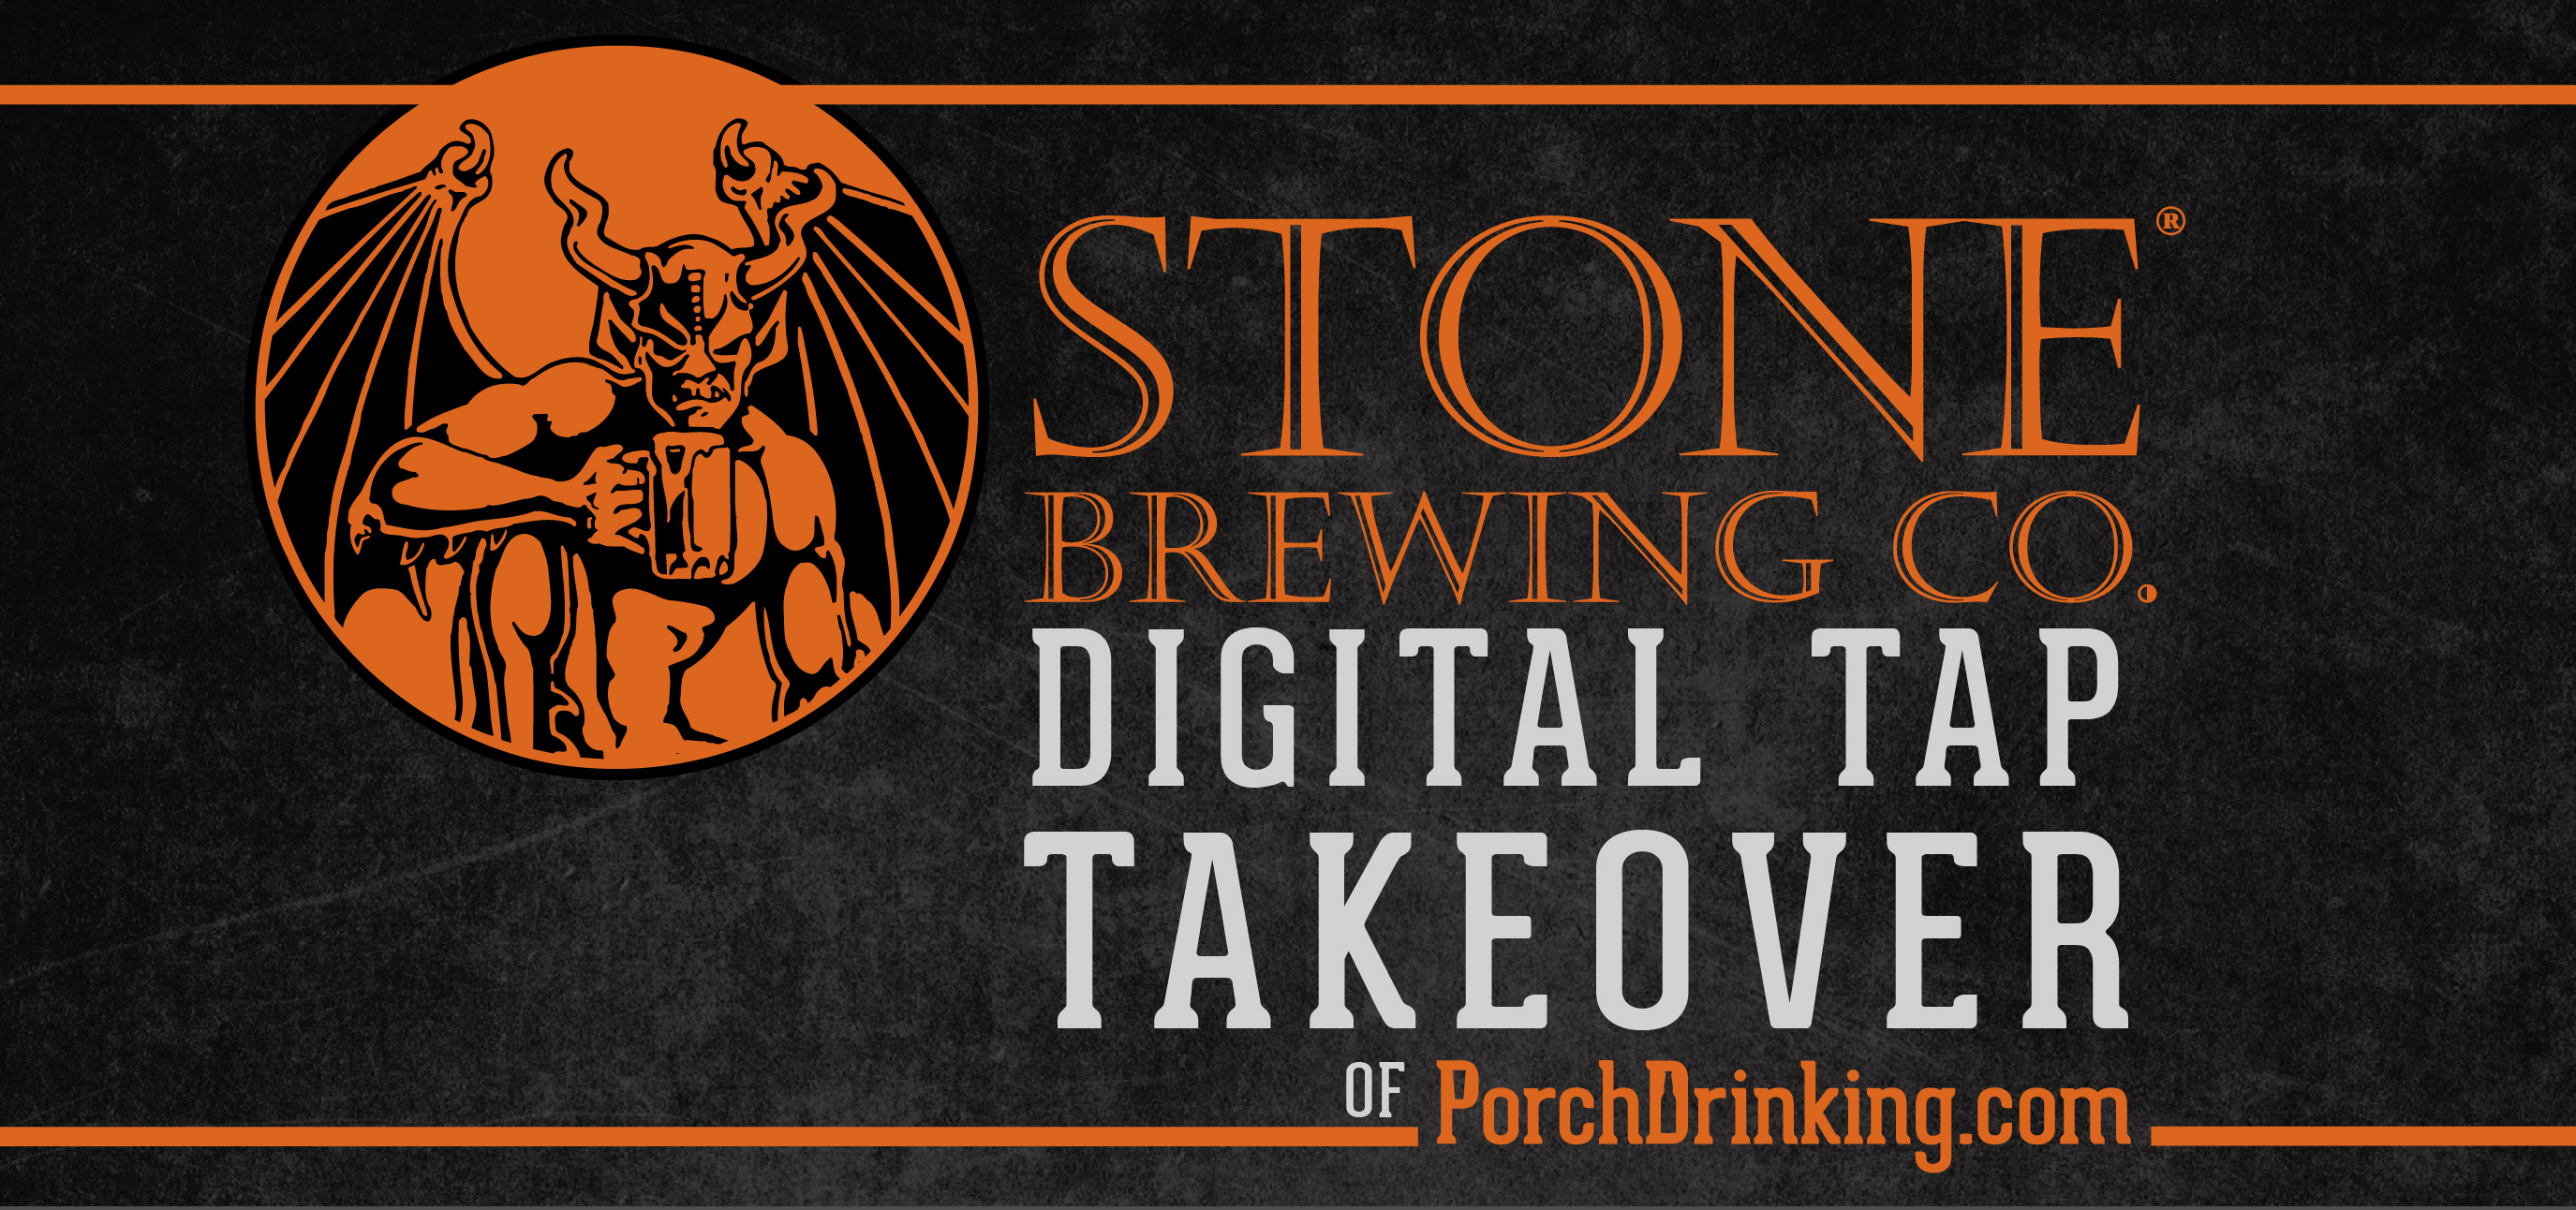 Stone Brewing Digital Tap Takeover